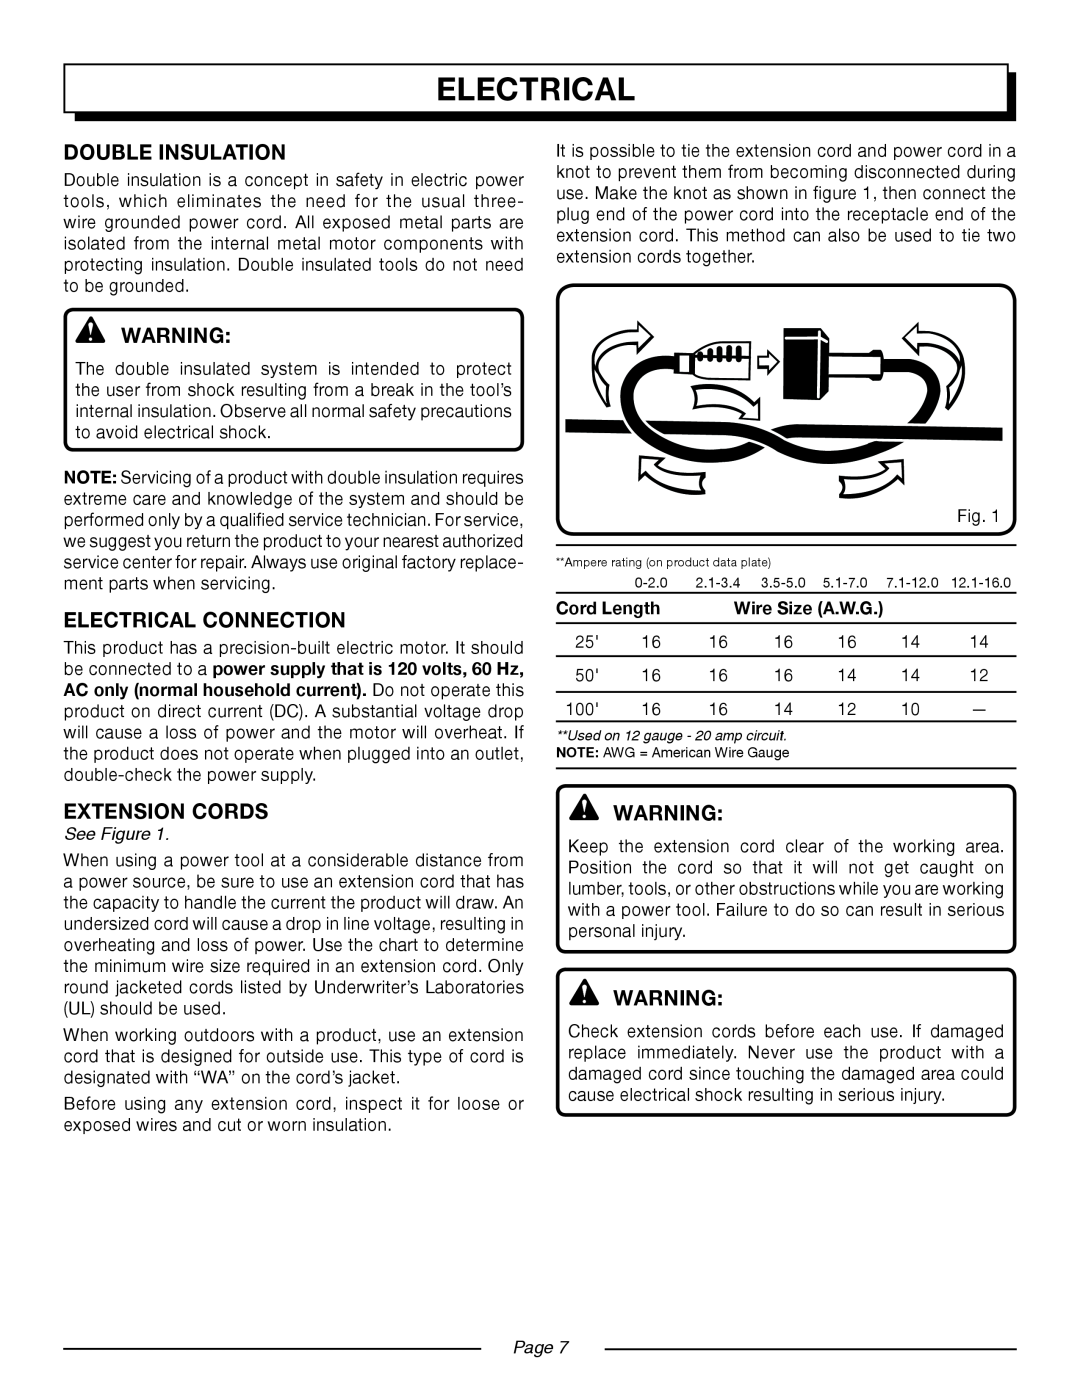 Homelite UT13220 Double Insulation, Electrical Connection, Extension Cords, See Figure, Cord Length, Wire Size A.W.G 